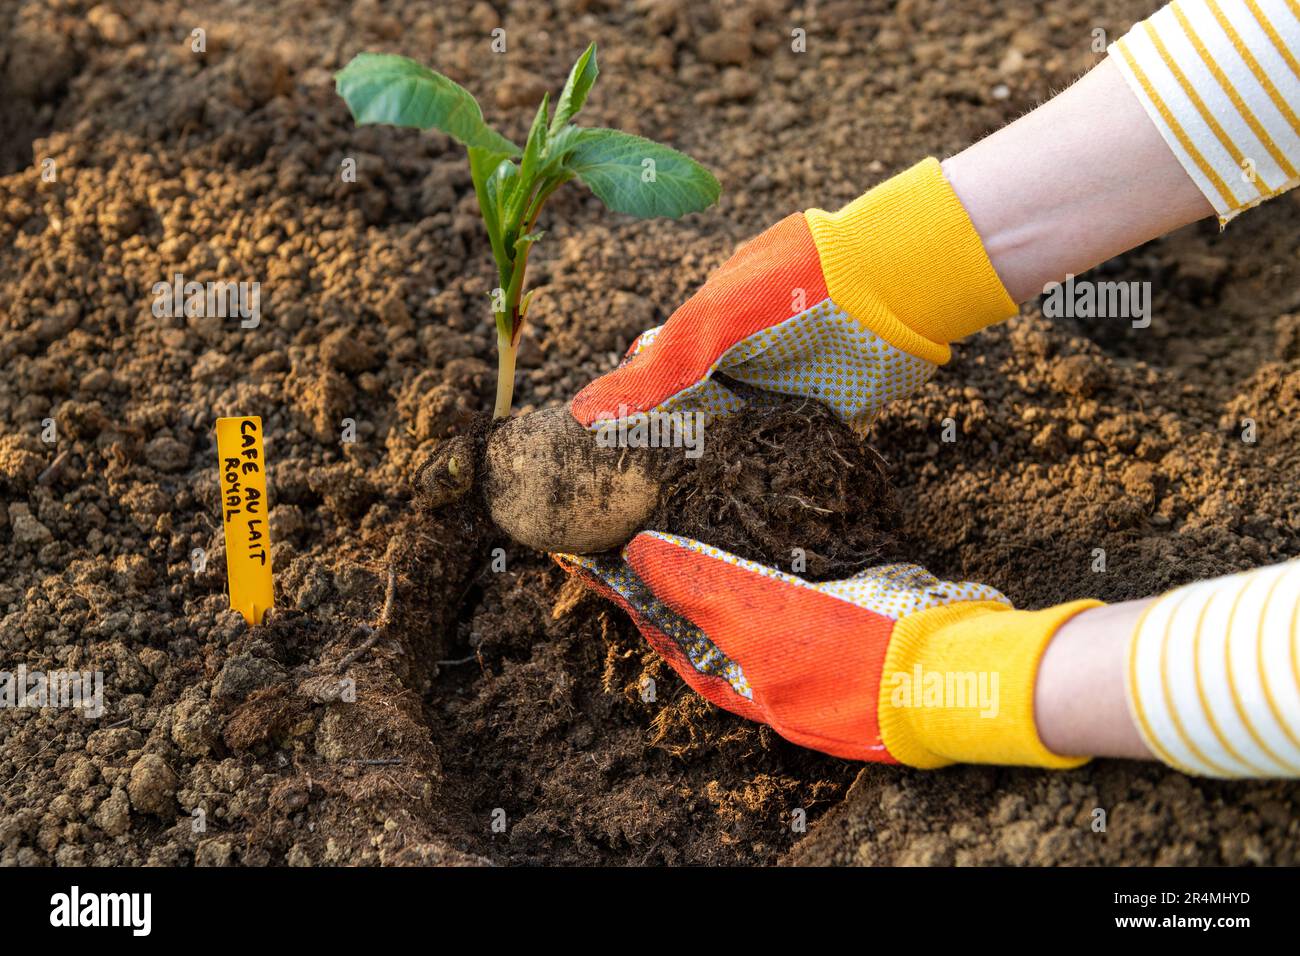 Planting dahlia plants in a flowerbed. Woman planting presprouted dahlia tubers in her garden. Stock Photo